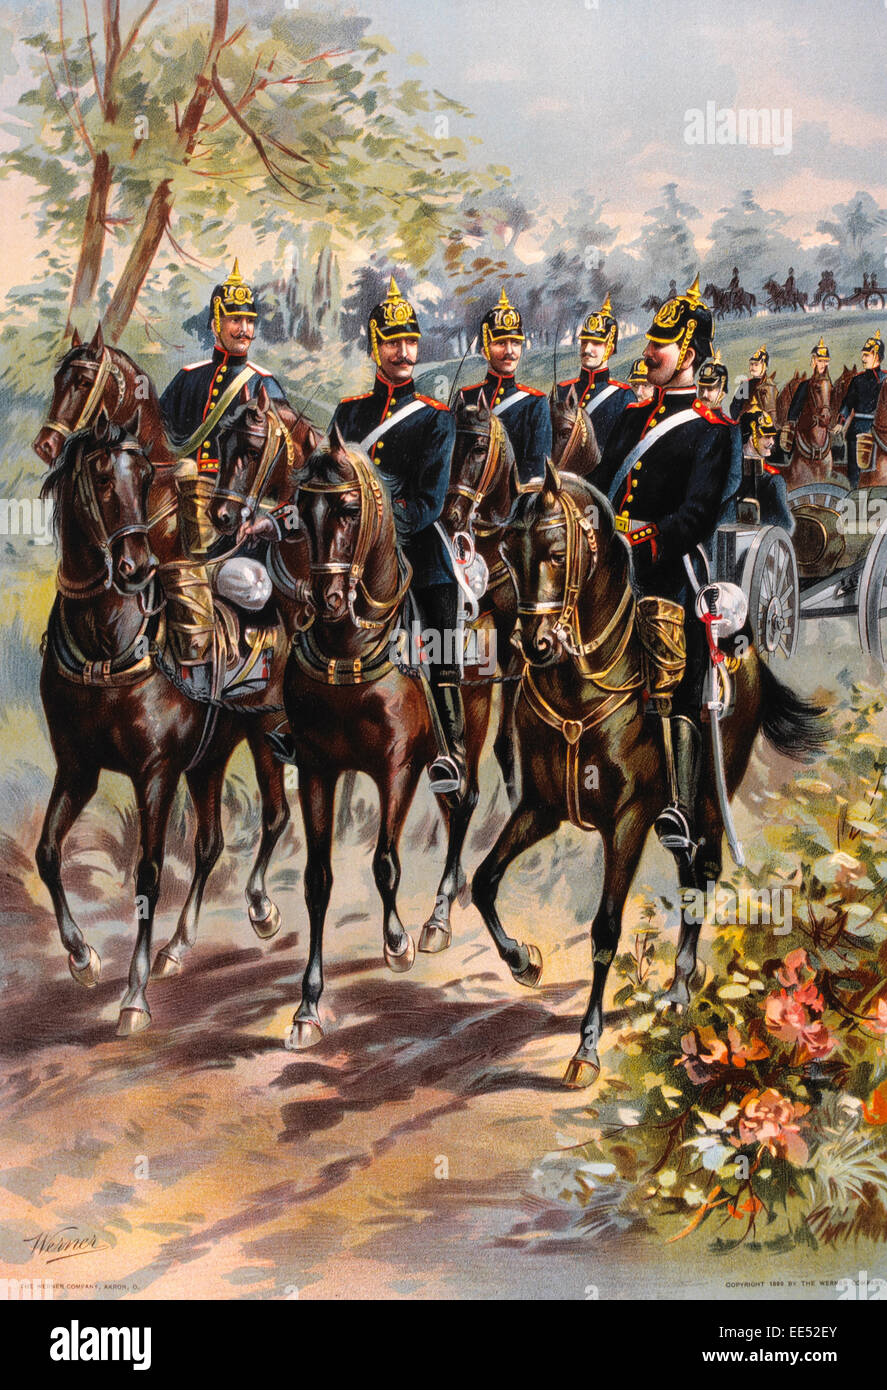 Royal Bavarian 2nd Field Artillery Regiment on the March, Chromolithograph, 1899 Stock Photo